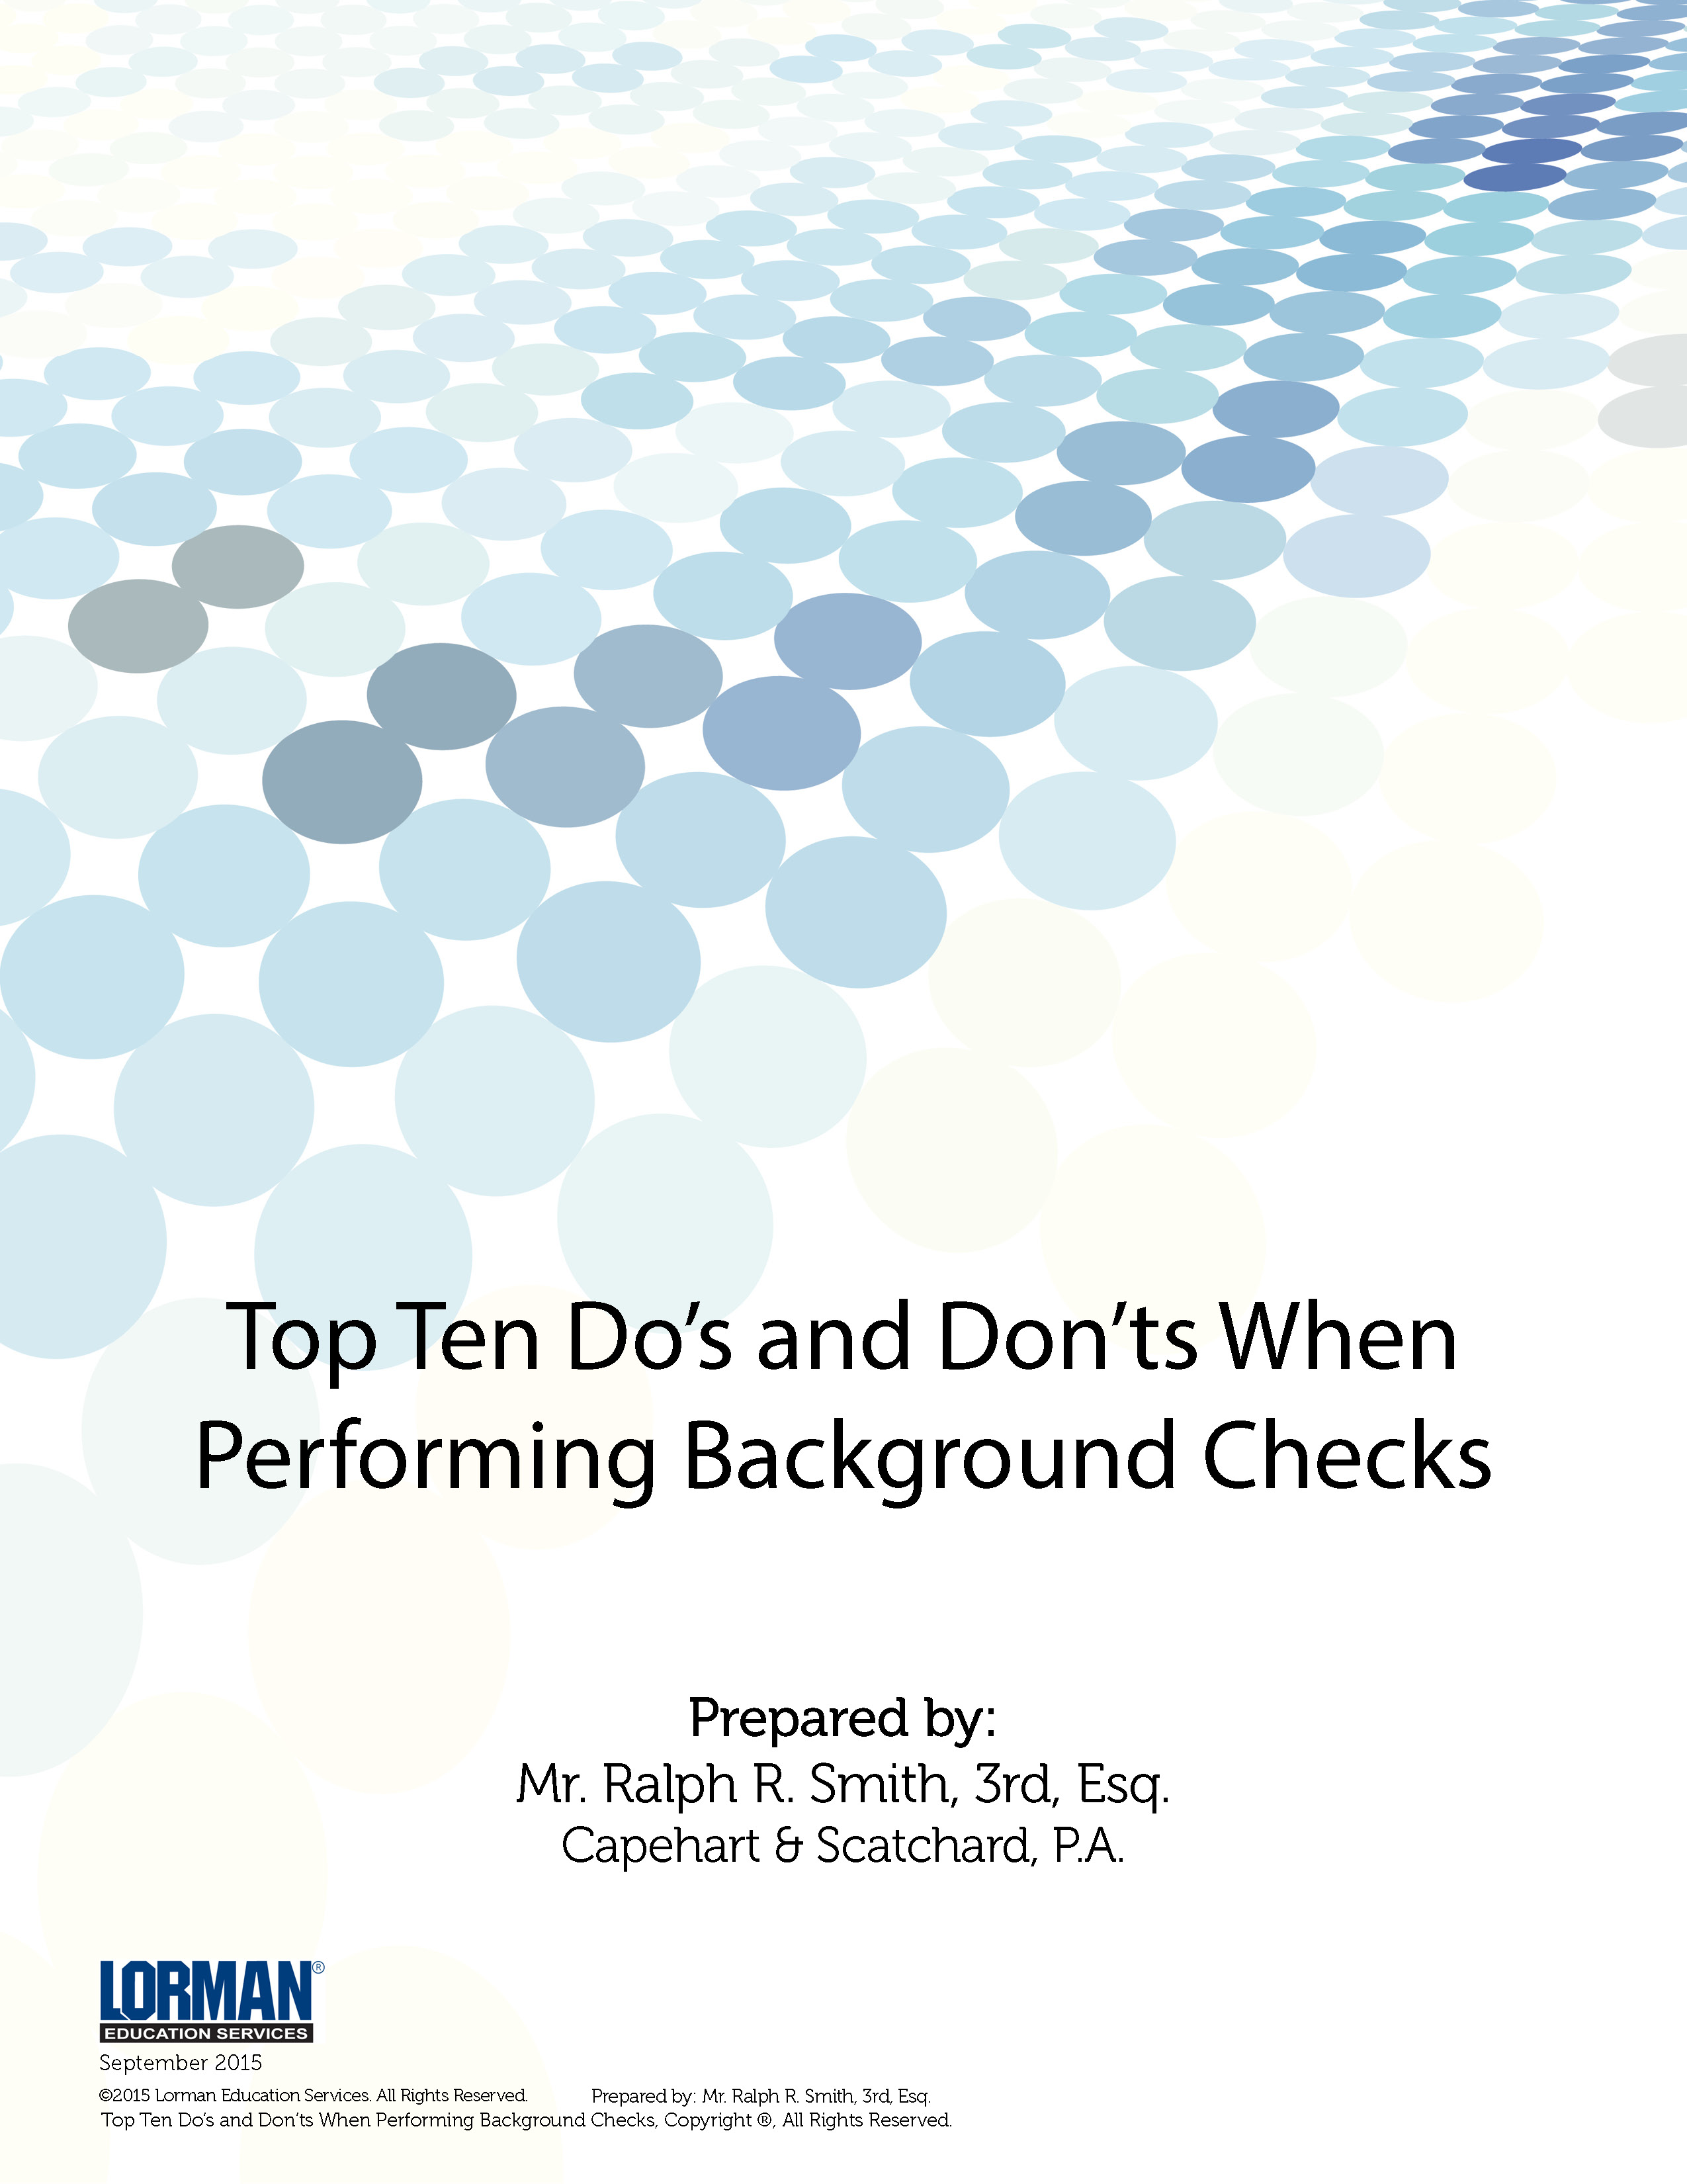 Top Ten Do’s and Don’ts When Performing Background Checks